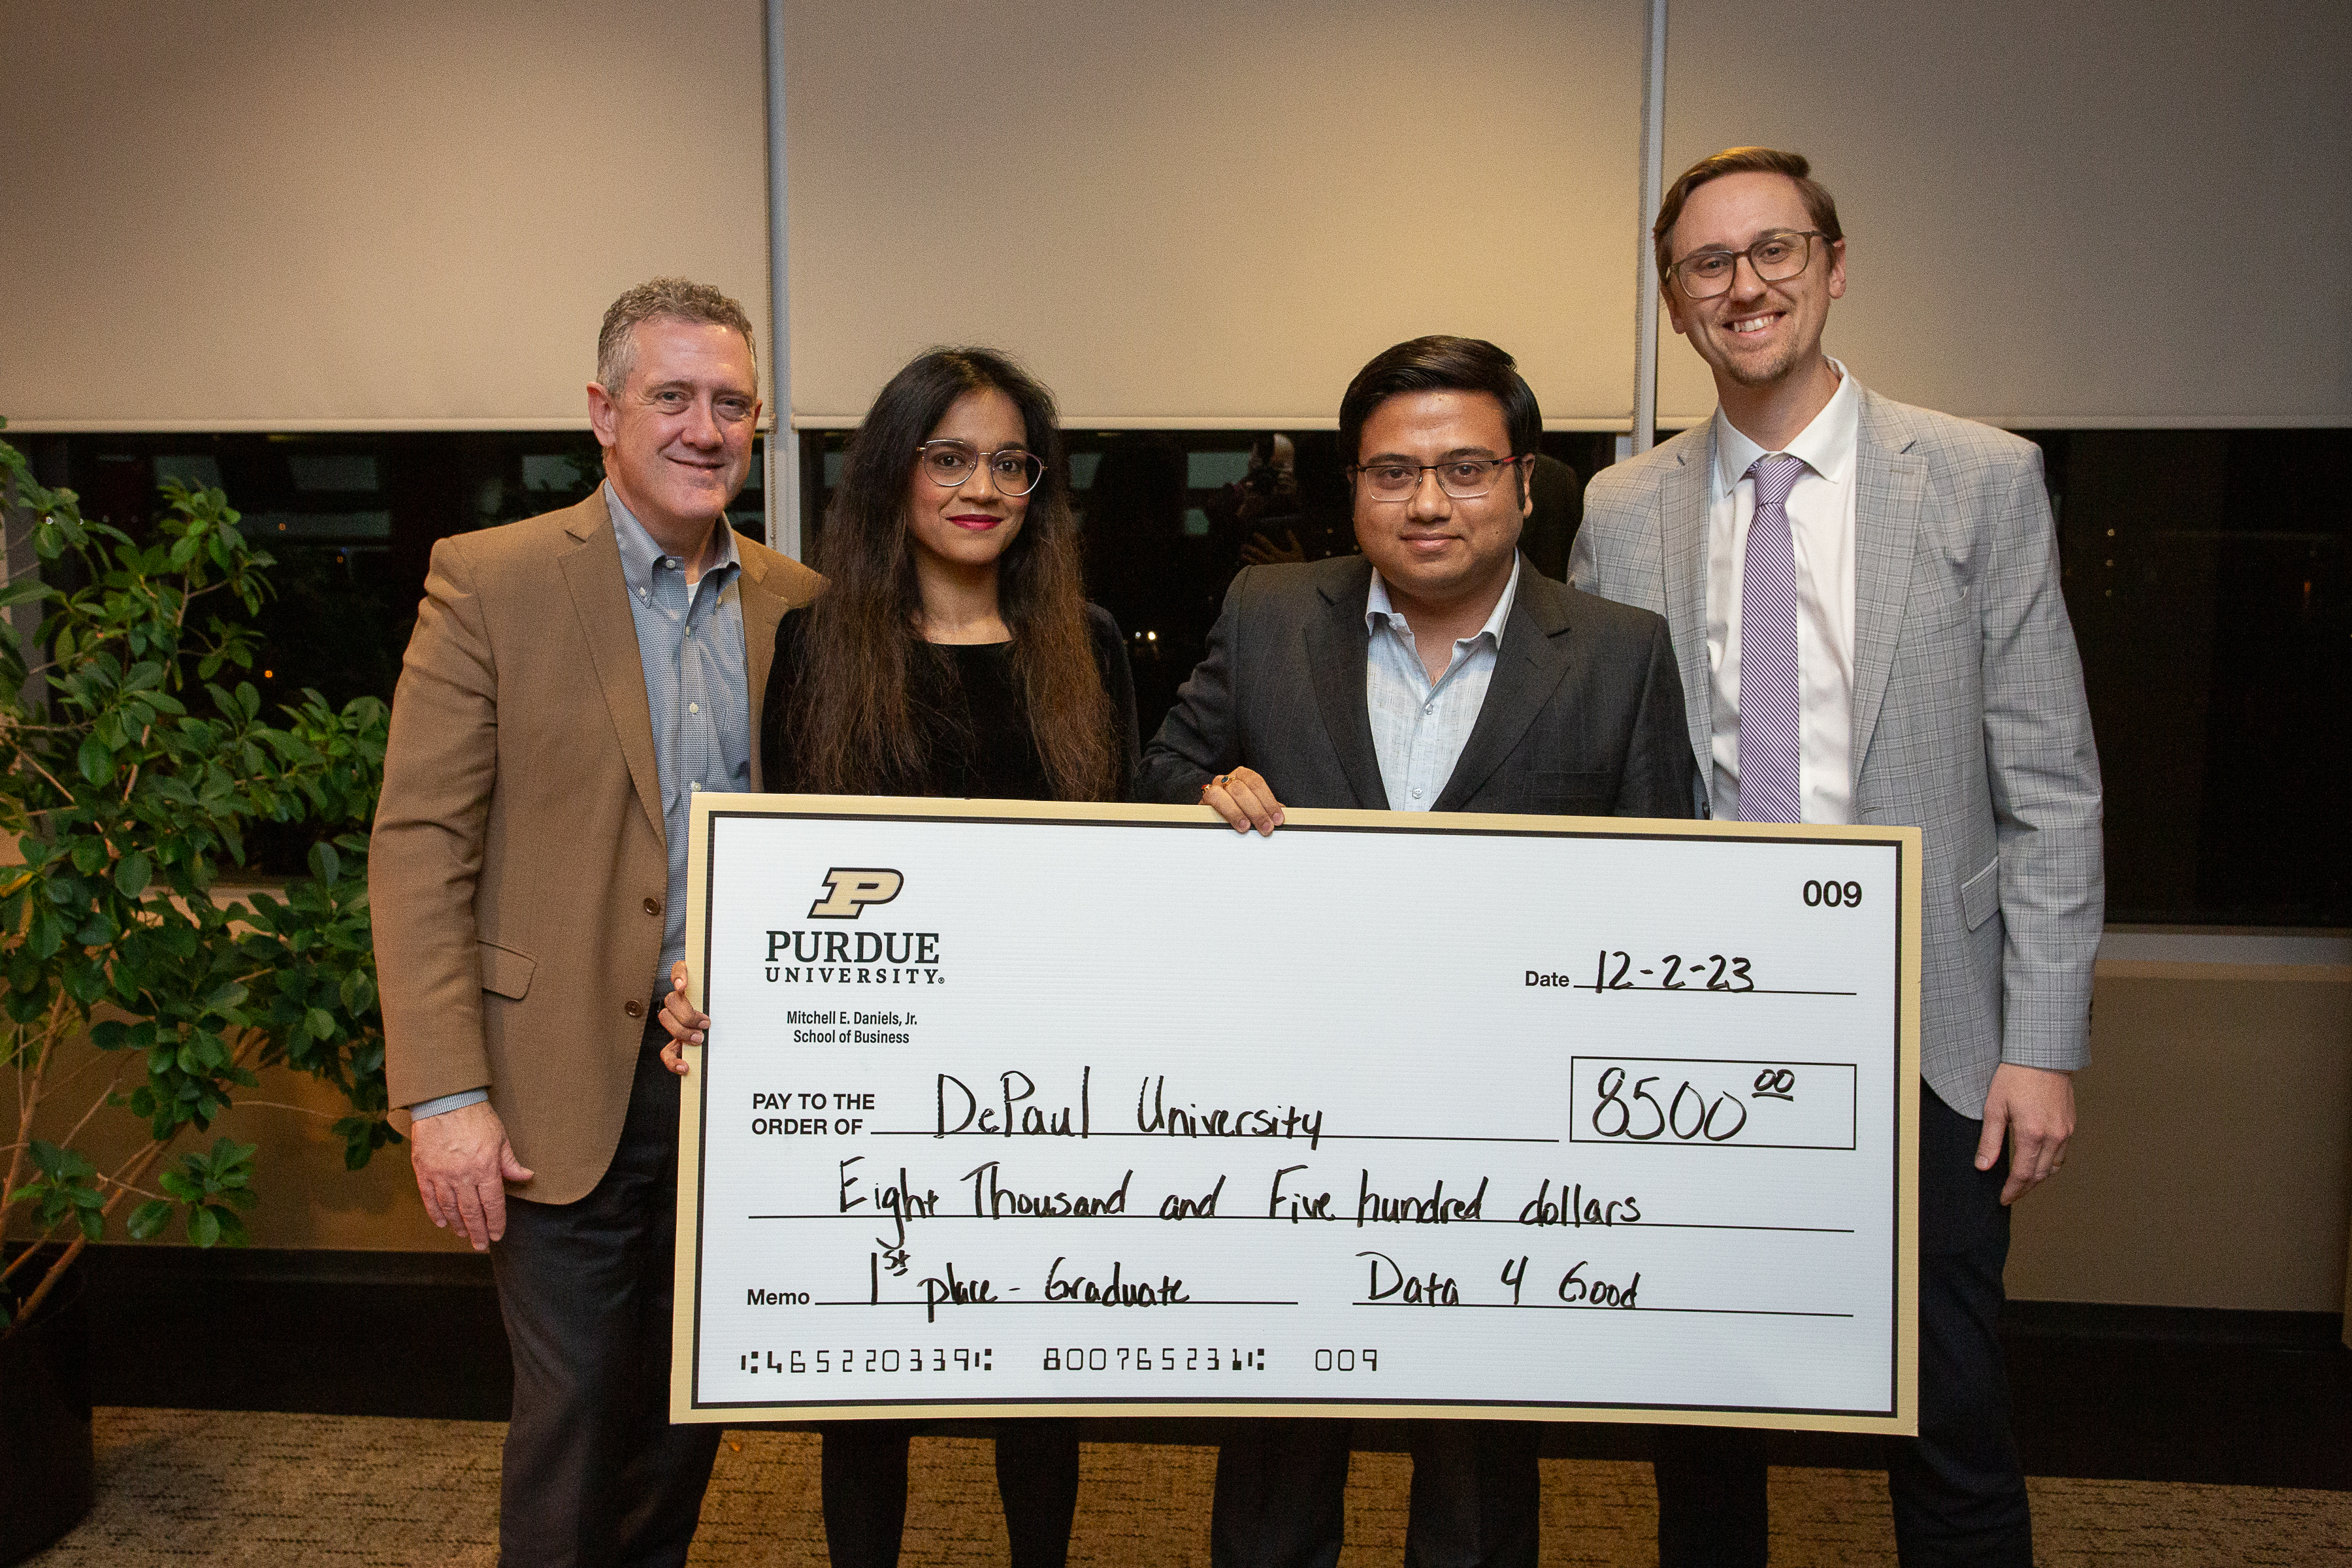 The winners of the Data4Good competition hold up a ceremonial check